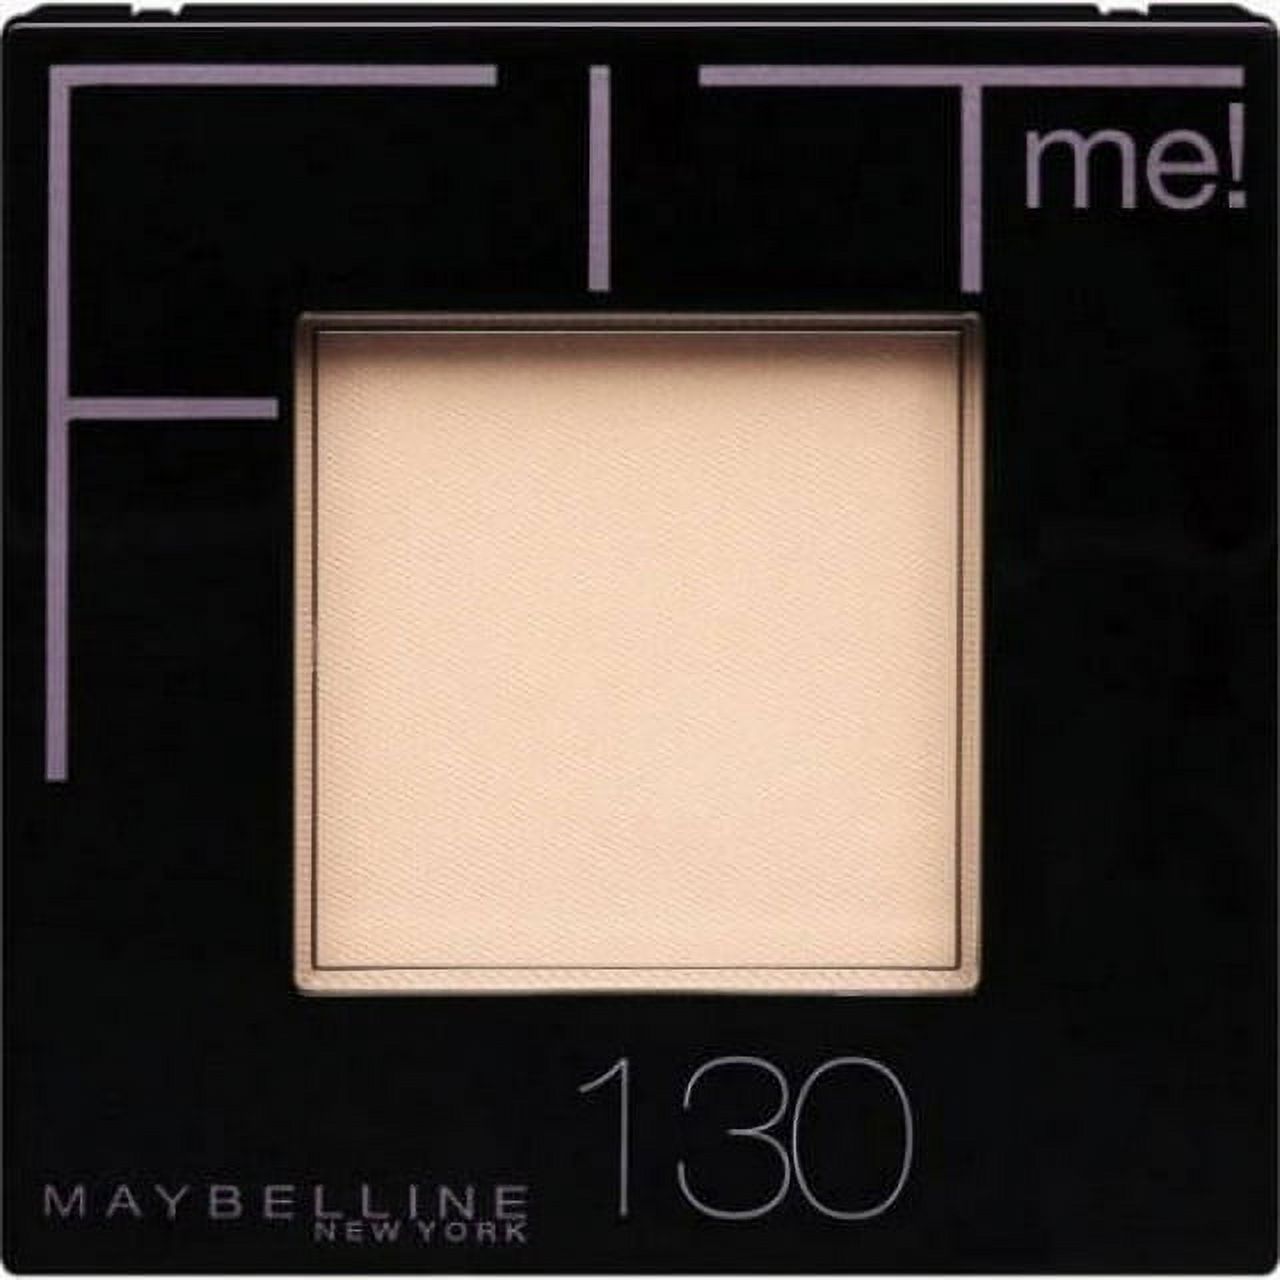 Maybelline Fit Me Set + Smooth Powder, Sun Beige - image 1 of 4